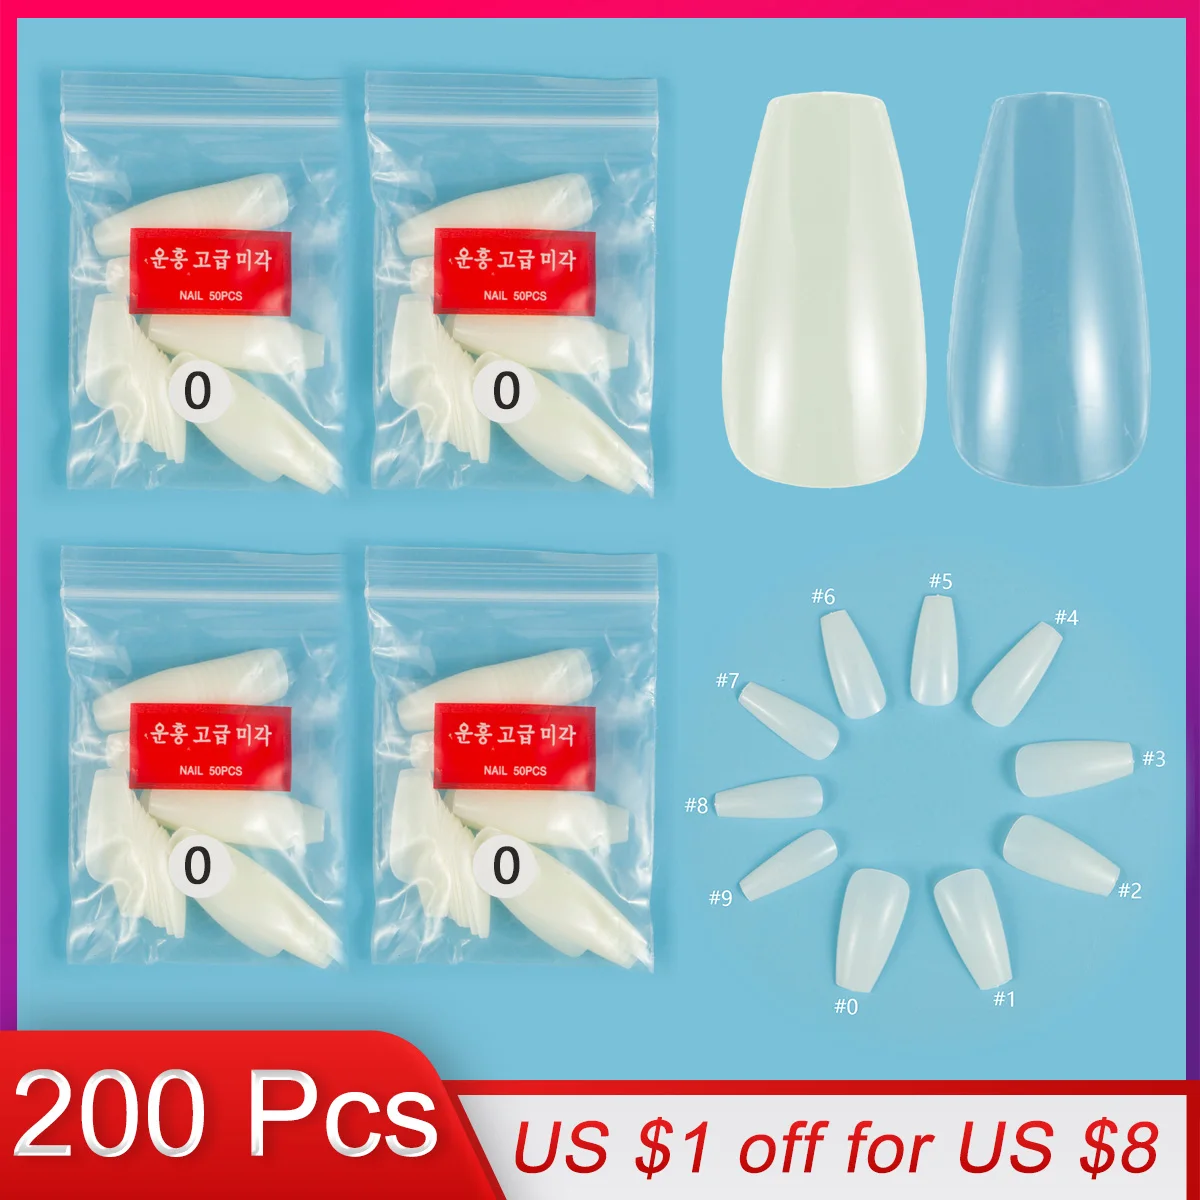 

200 Pieces Same Size Of M Coffin False Nail Tips Purchase Certain Sizes Fake Nails for Nail Art Paintting Prastic